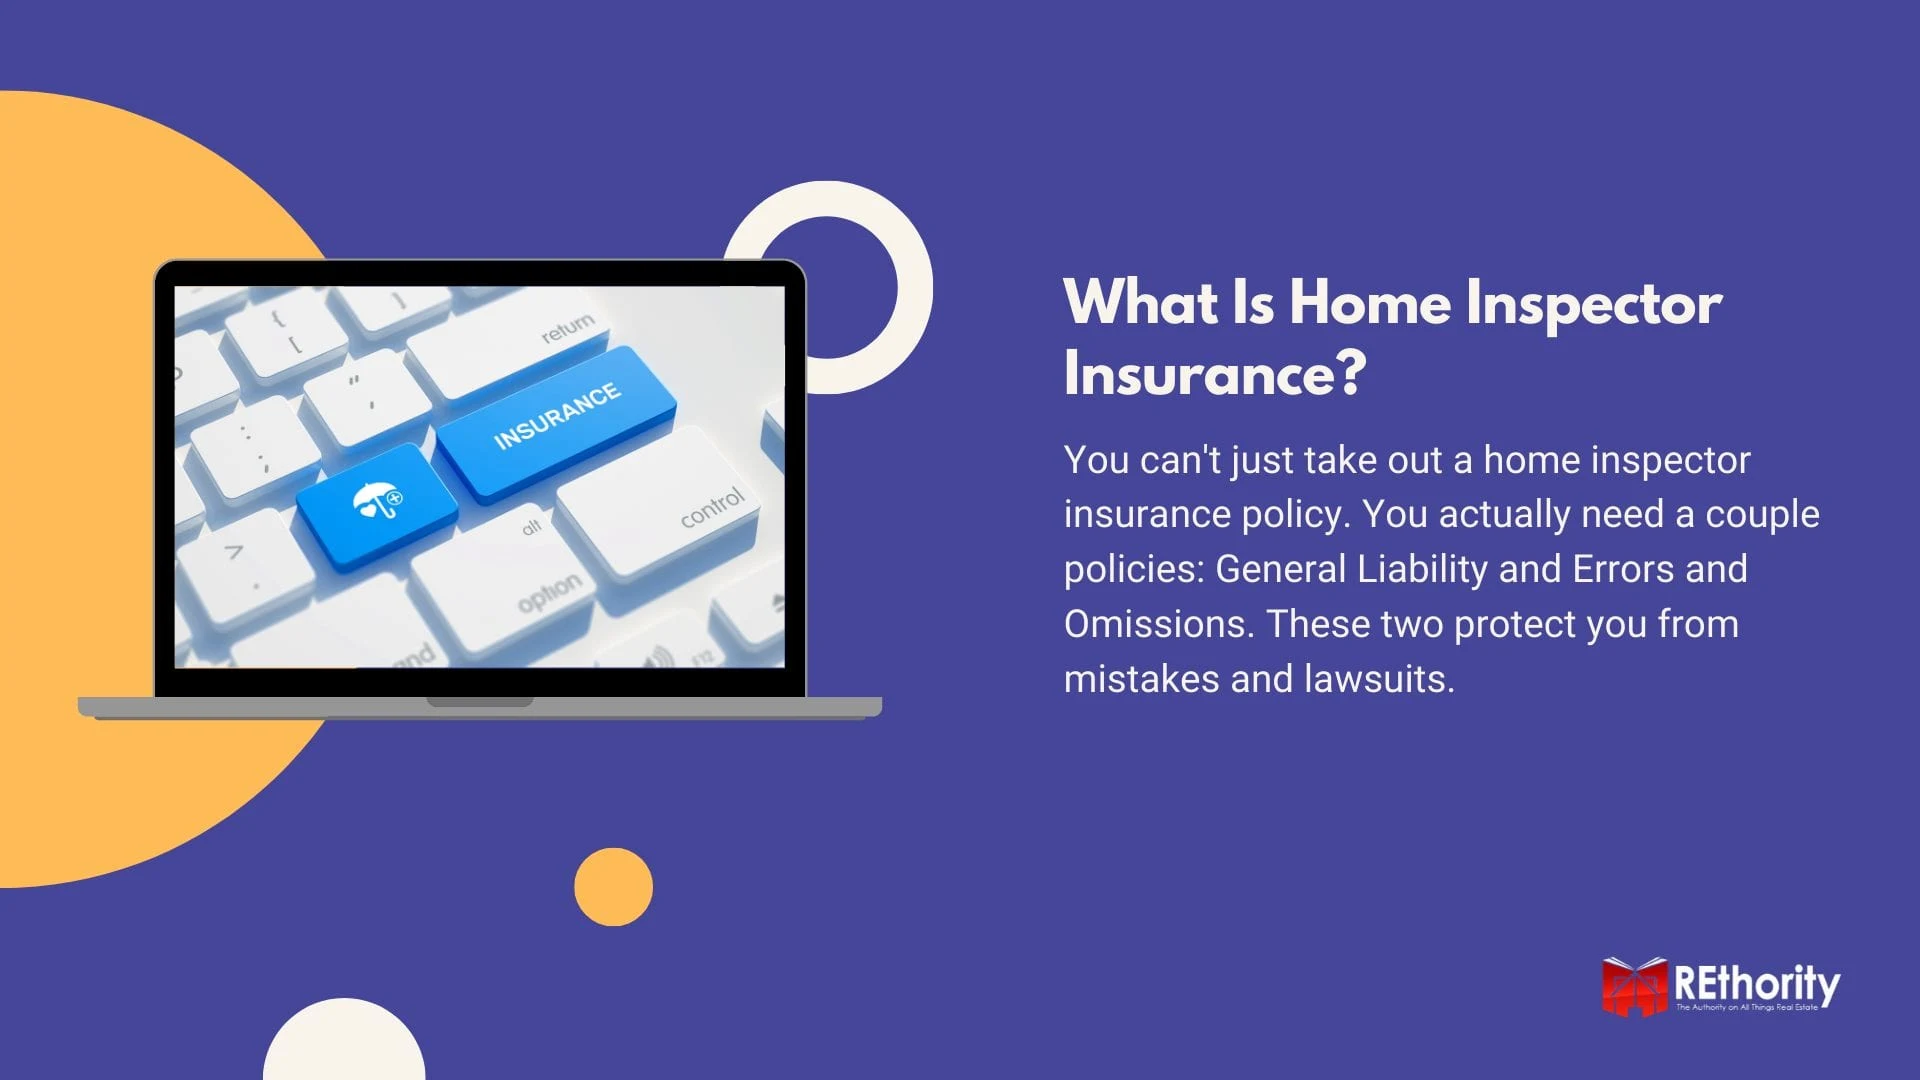 What Is Home Inspector Insurance graphic featuring the two types of policies an inspector needs